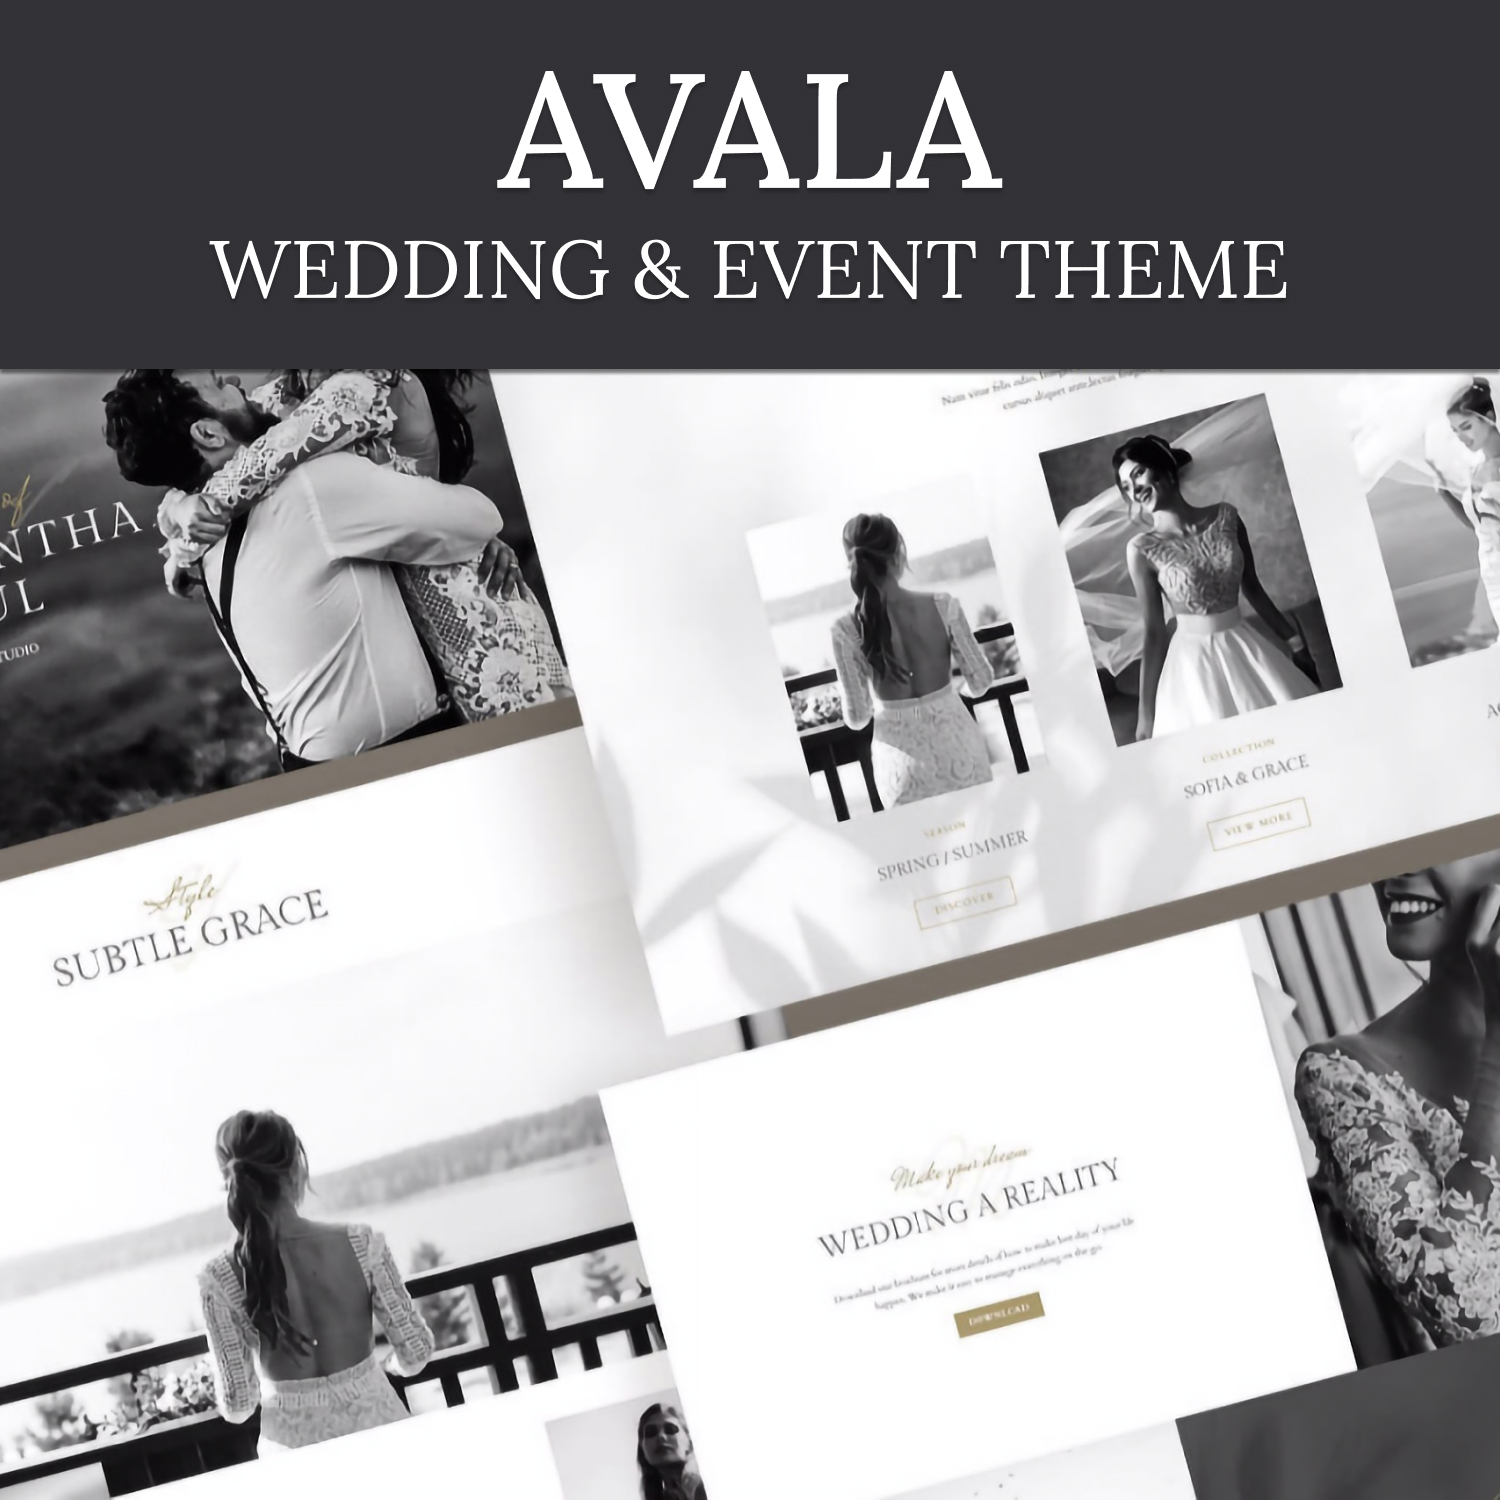 Preview avala wedding event theme.